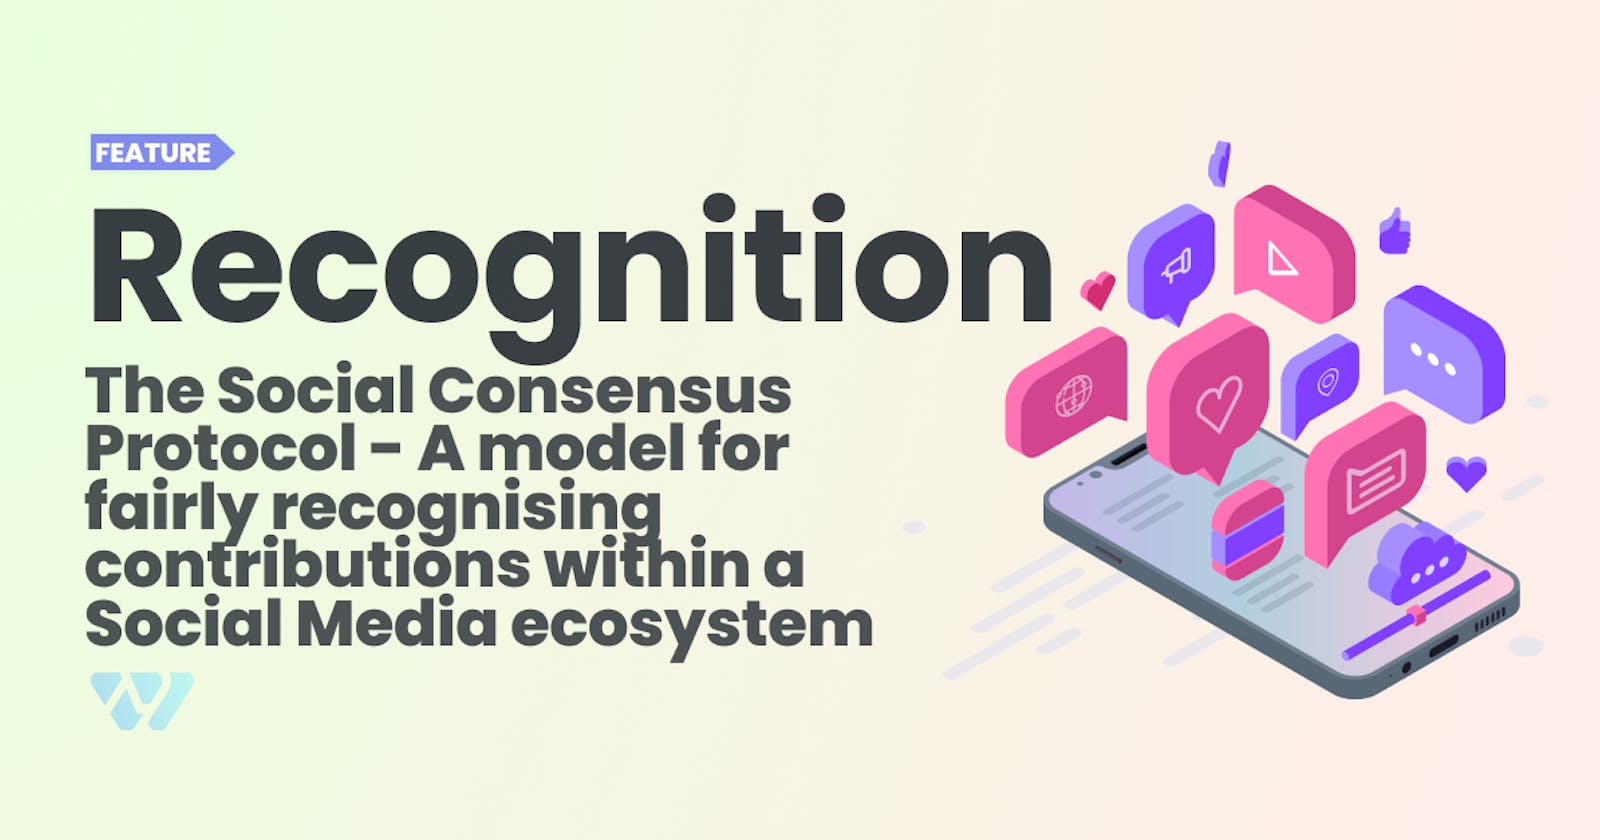 The Social Consensus Protocol — A model for fairly recognising contributions within a Social Media ecosystem